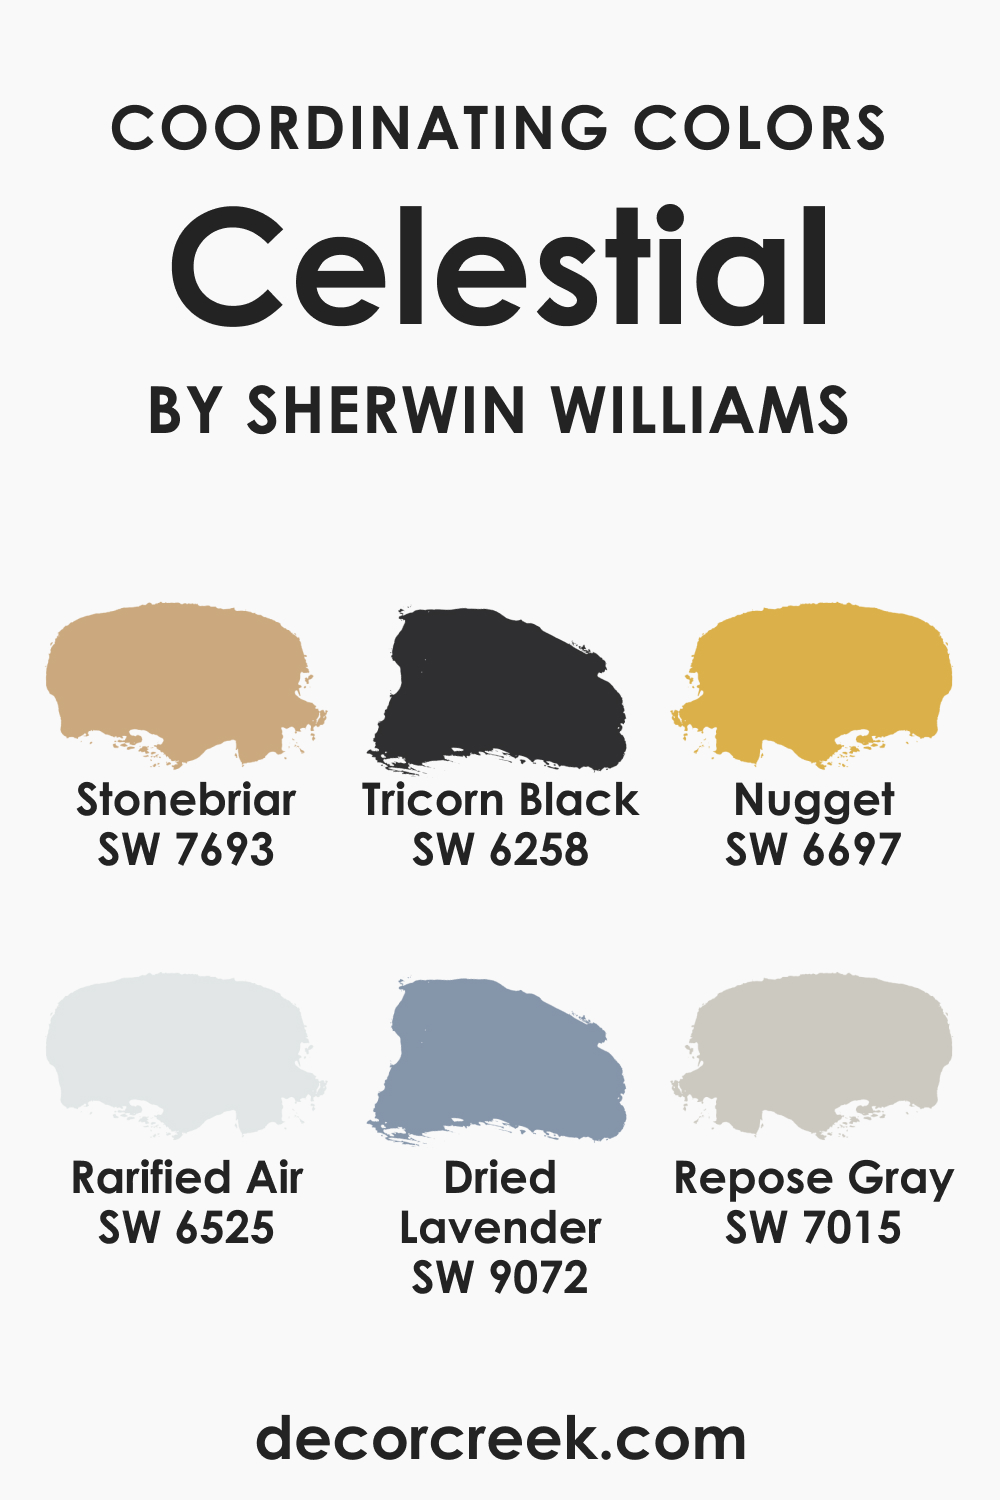 Coordinating Colors of SW 6808 Celestial